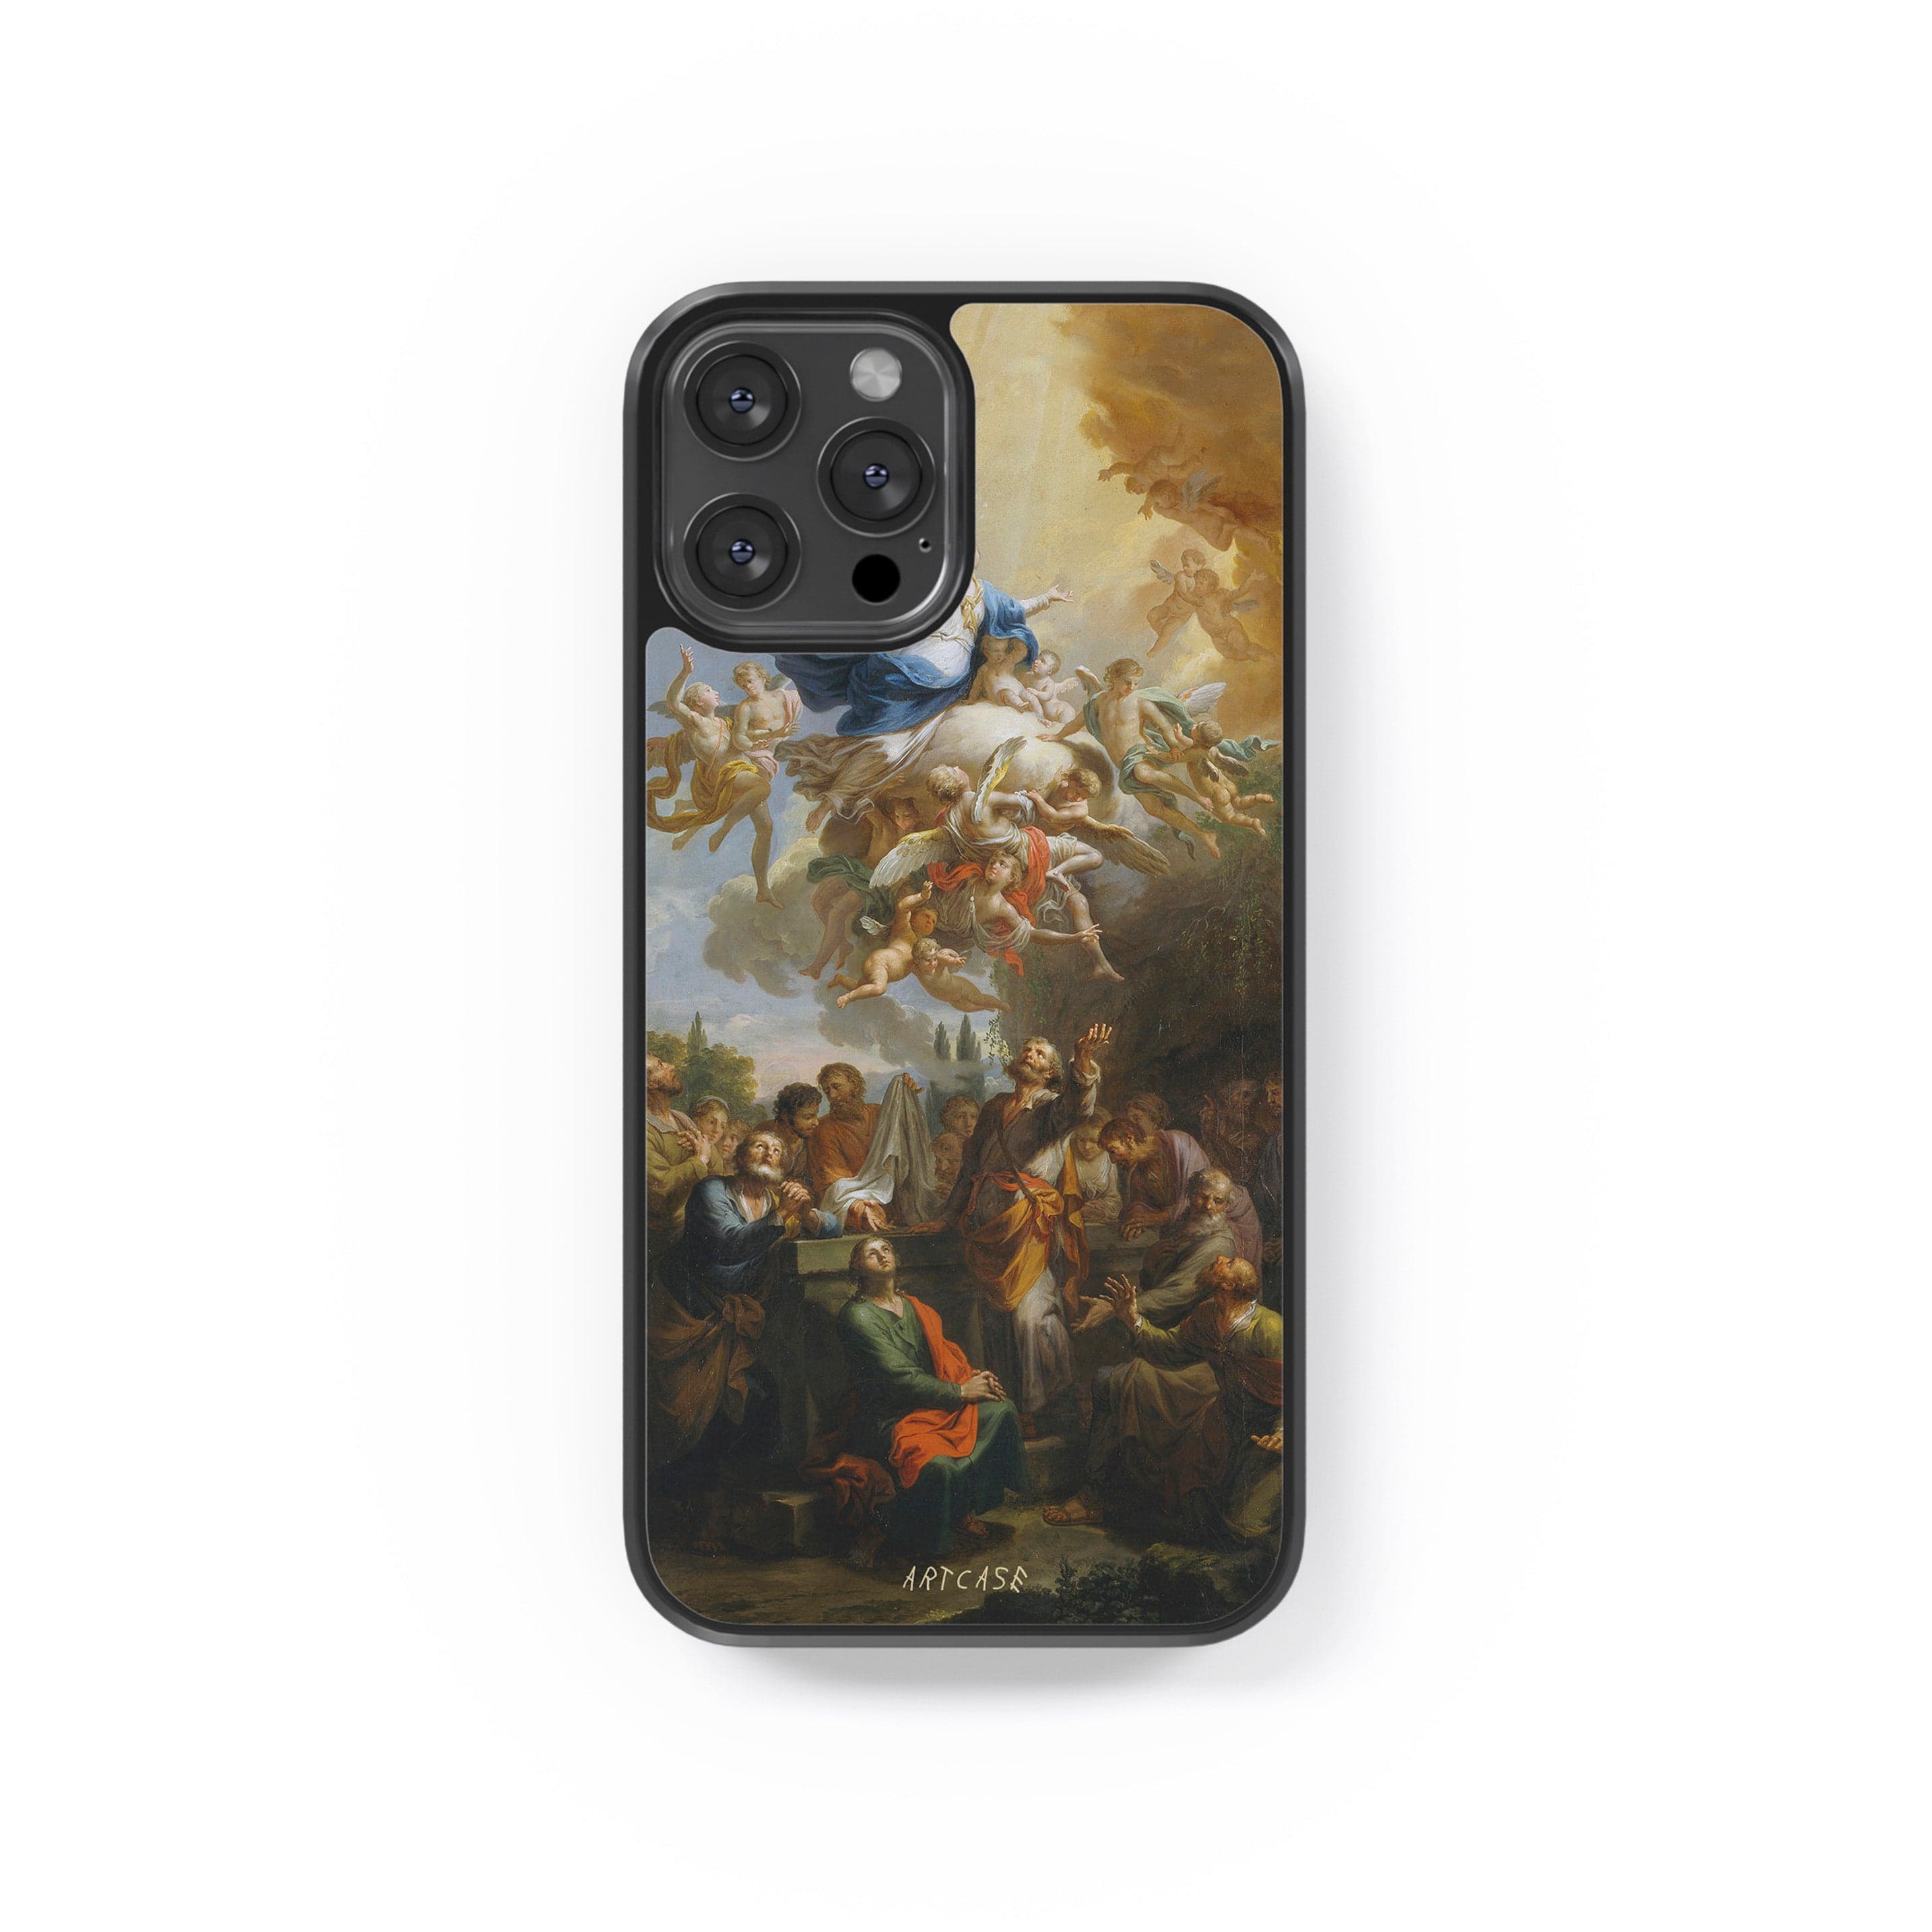 Phone case "Assumption of Mary "